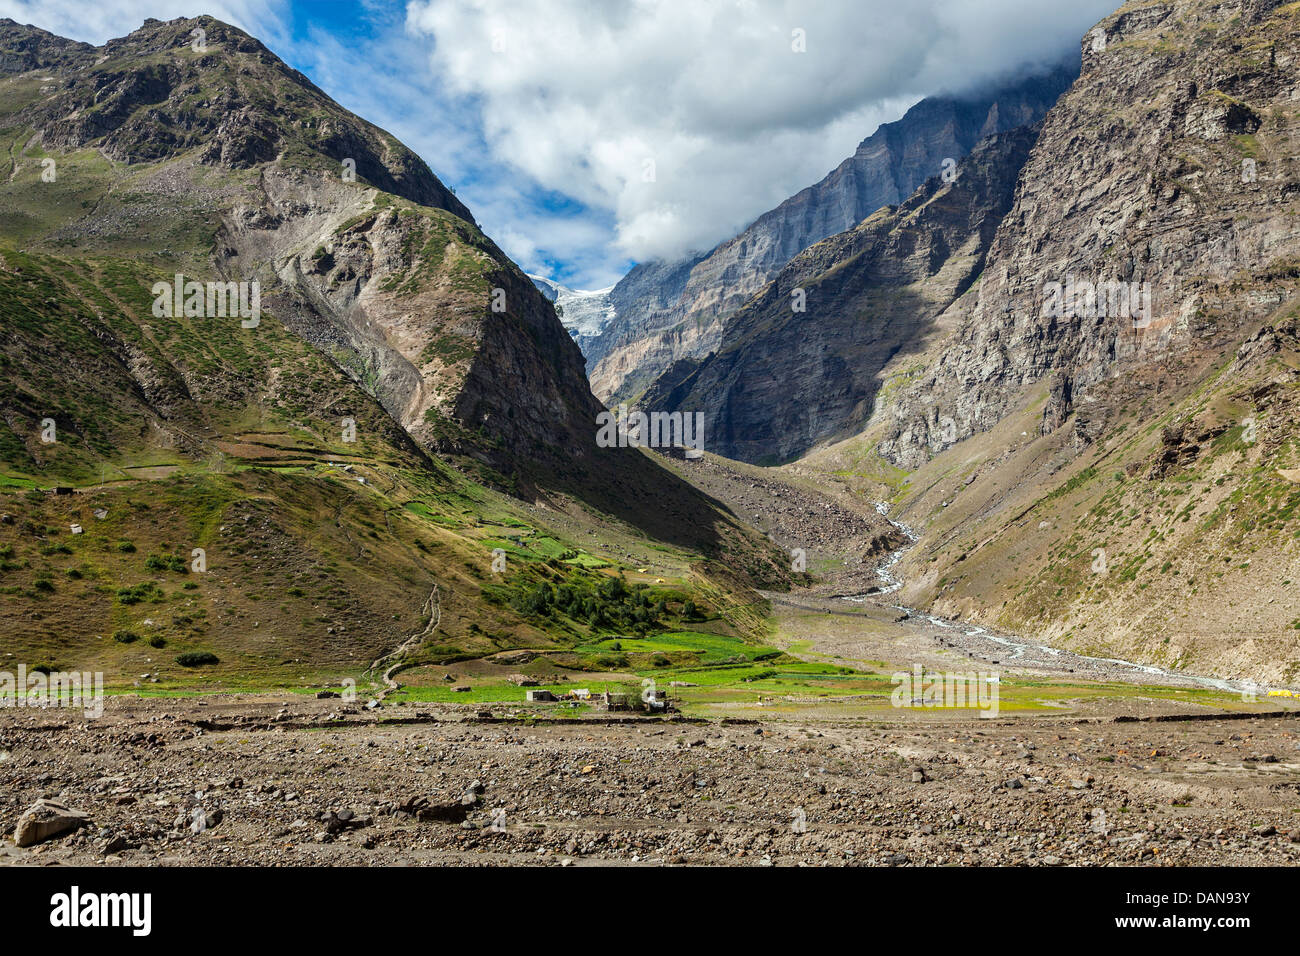 HImalayas mountains and Himalayan landscape in Lahaul valley, India Stock Photo